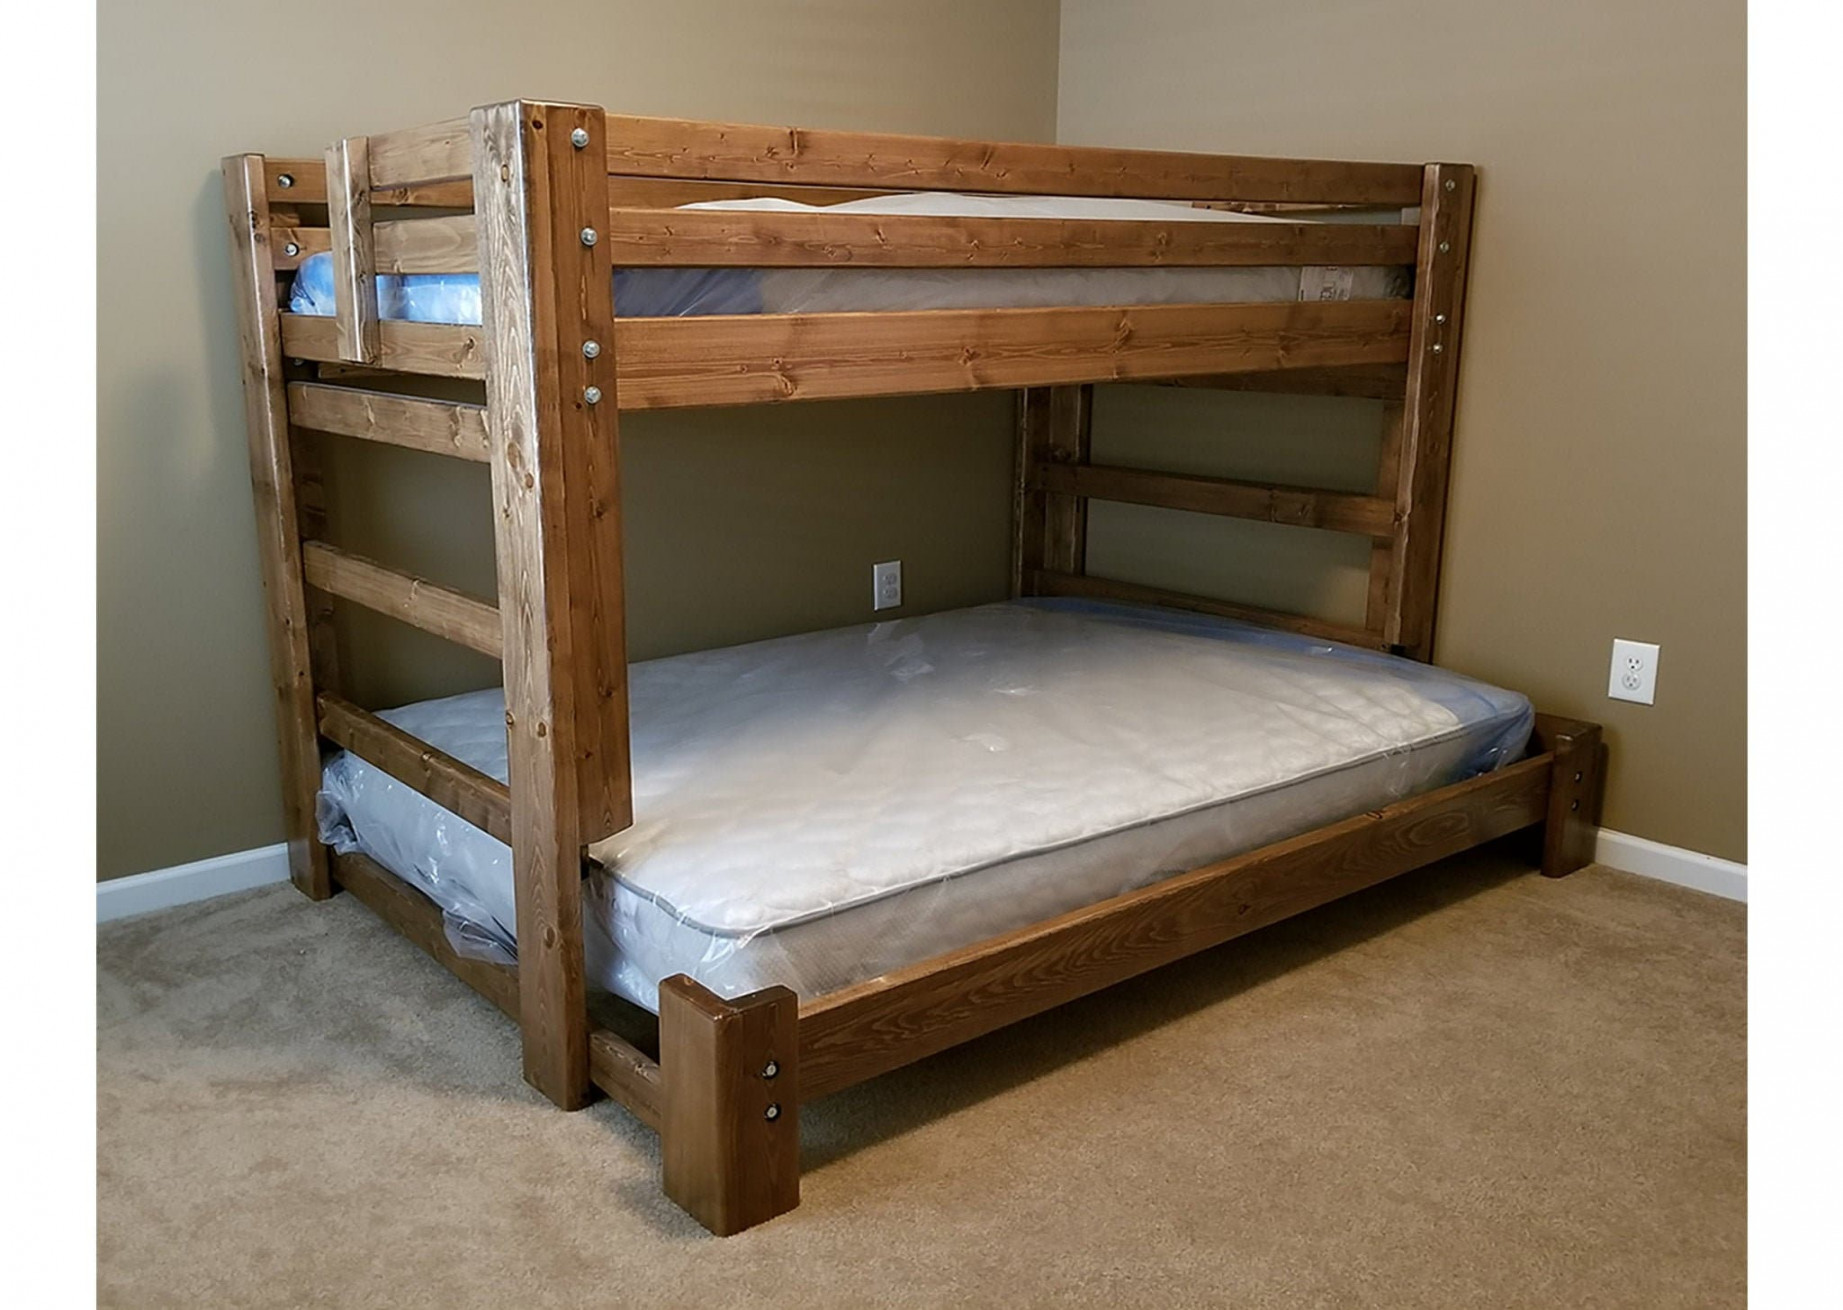 Wood Bunk Beds Twin Over Full